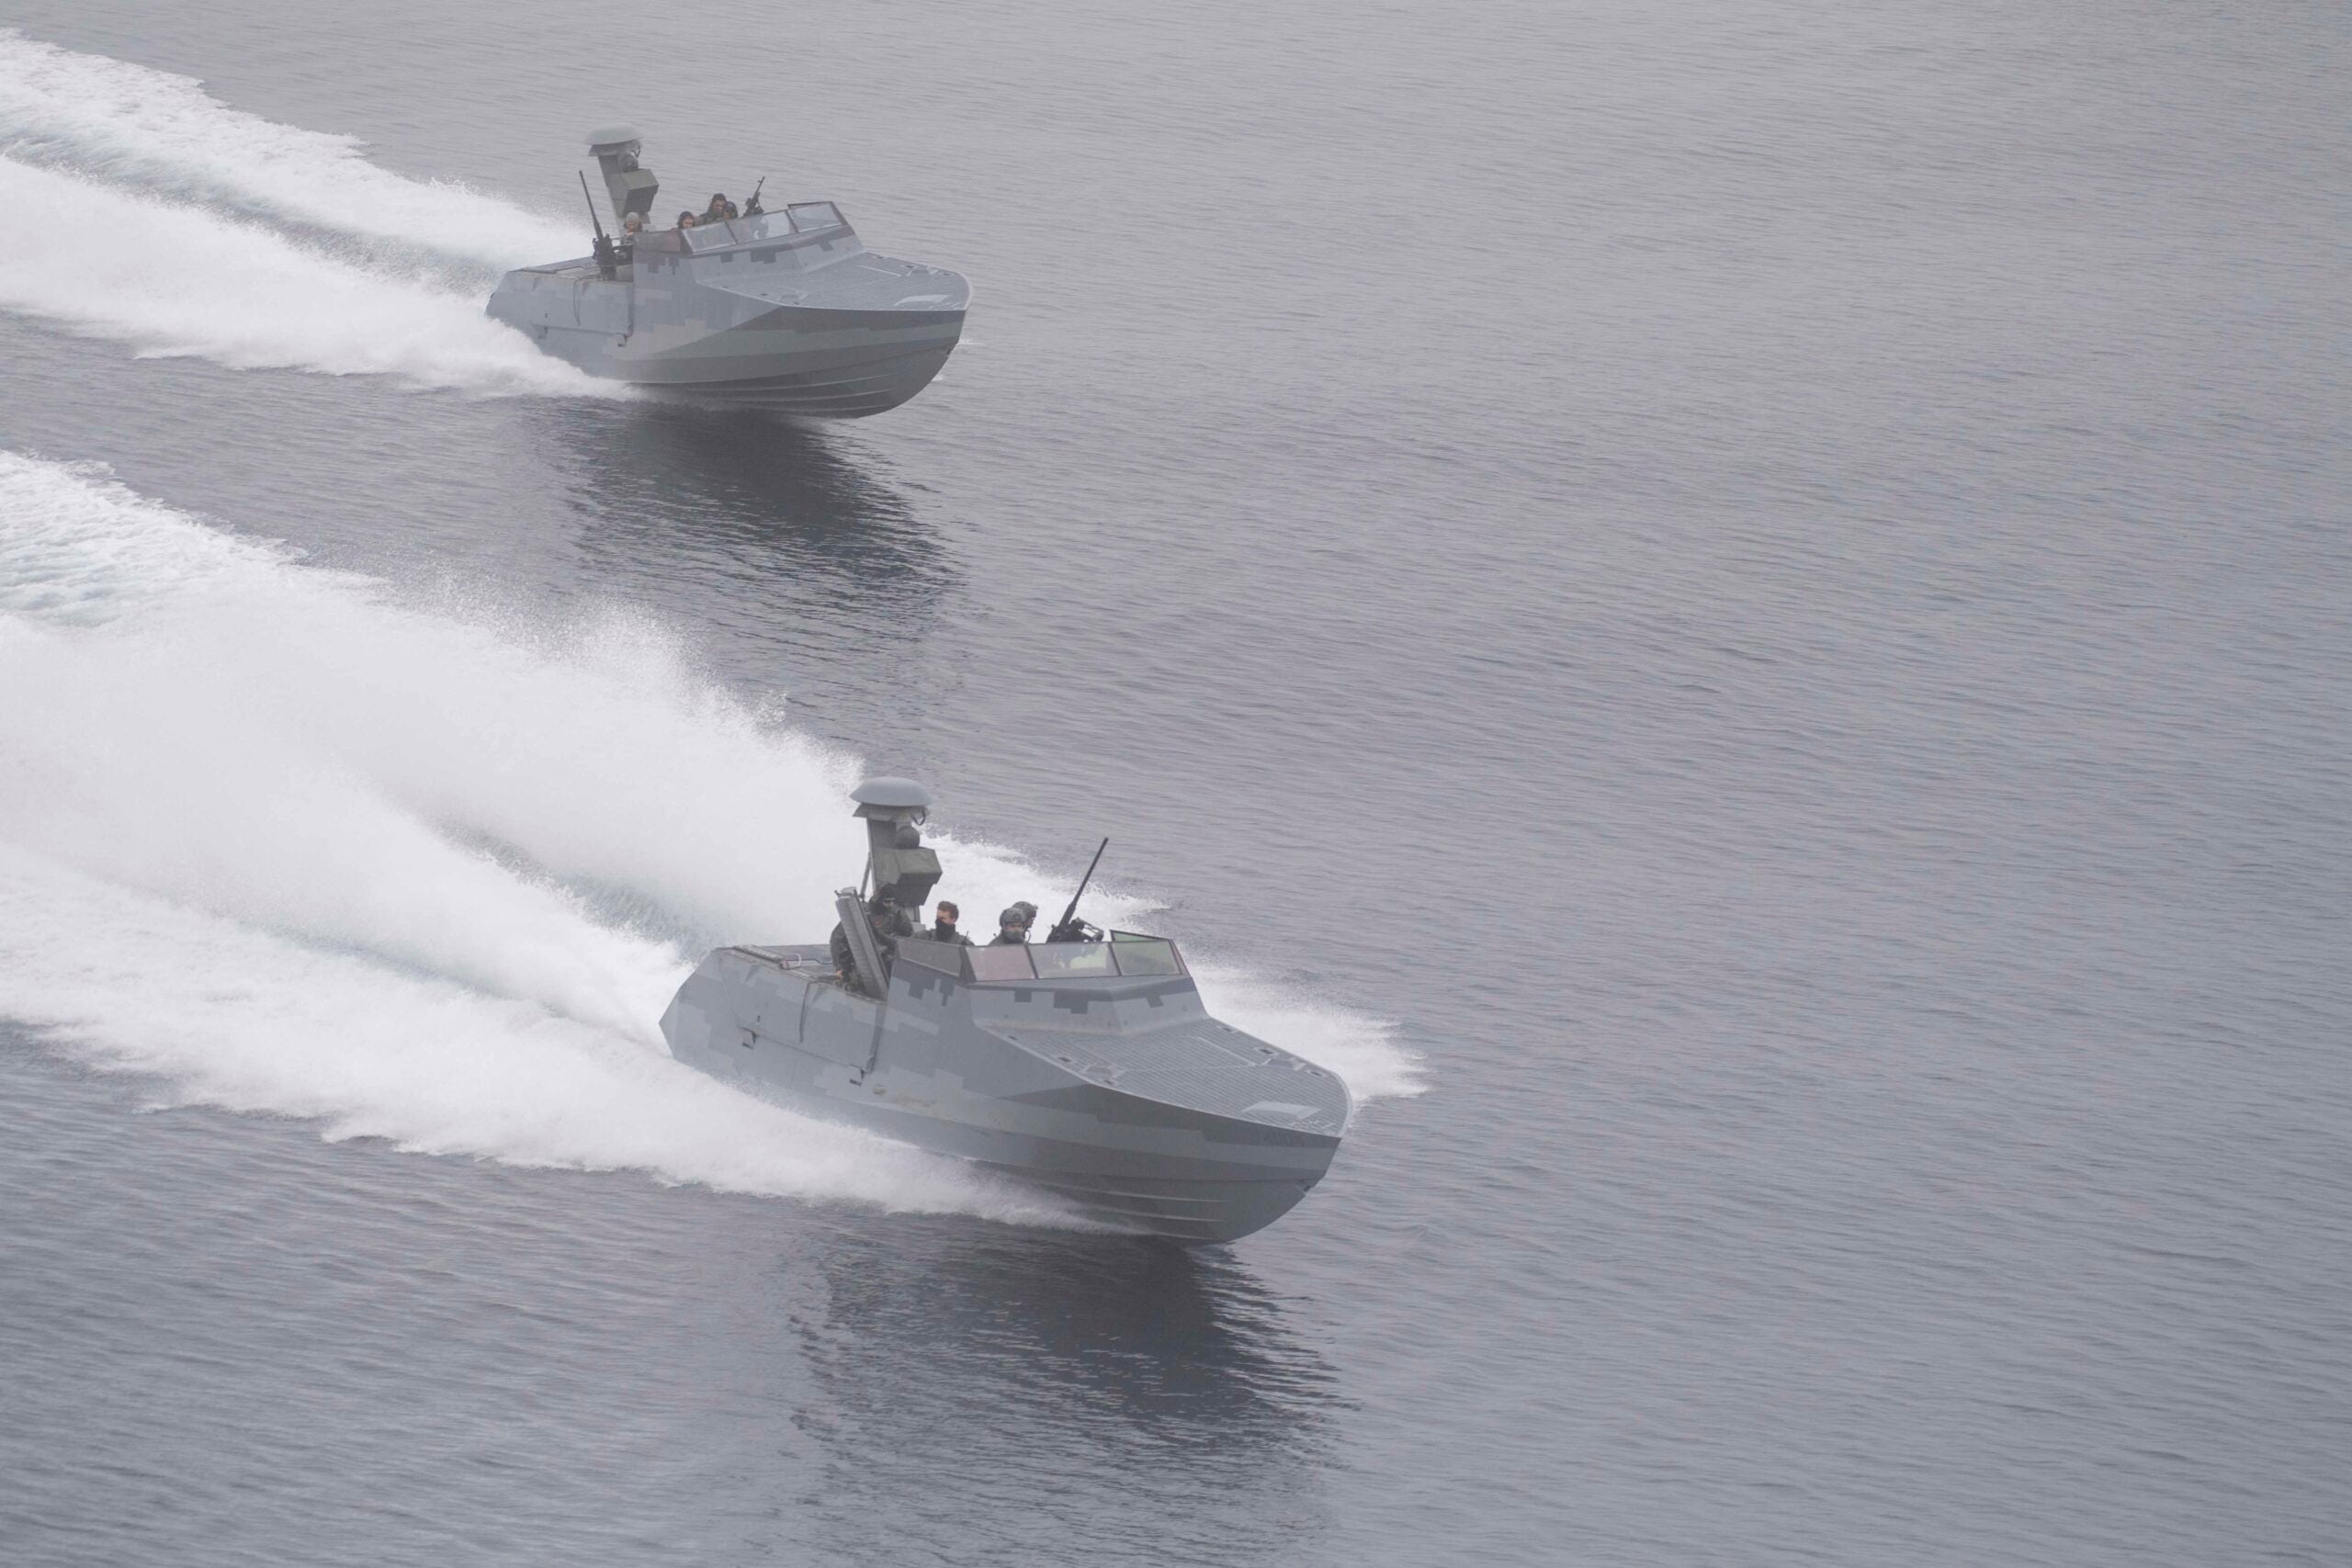 Two Combatant Craft Assault boats conduct high speed tests after launching from well deck of amphibious transport dock ship USS John P. Murtha (LPD 26) during Operation POLAR DAGGER, Aug. 23, 2023. Amphibious transport dock ships like John P. Murtha have many unique capabilities that make them ideal platforms to support special operations forces, such as the ability to embark helicopters from the joint force, launch and recover Naval Special Warfare combatant craft, and maintain all-domain awareness through advanced sensors. Operations NOBLE DEFENDER and POLAR DAGGER sharpen joint special operations integration and provides the forces the opportunity to test new capabilities and advance response options in defense of the U.S. homeland. (U.S. Navy photo by Mass Communication Specialist 2nd Class Joshua Samoluk)